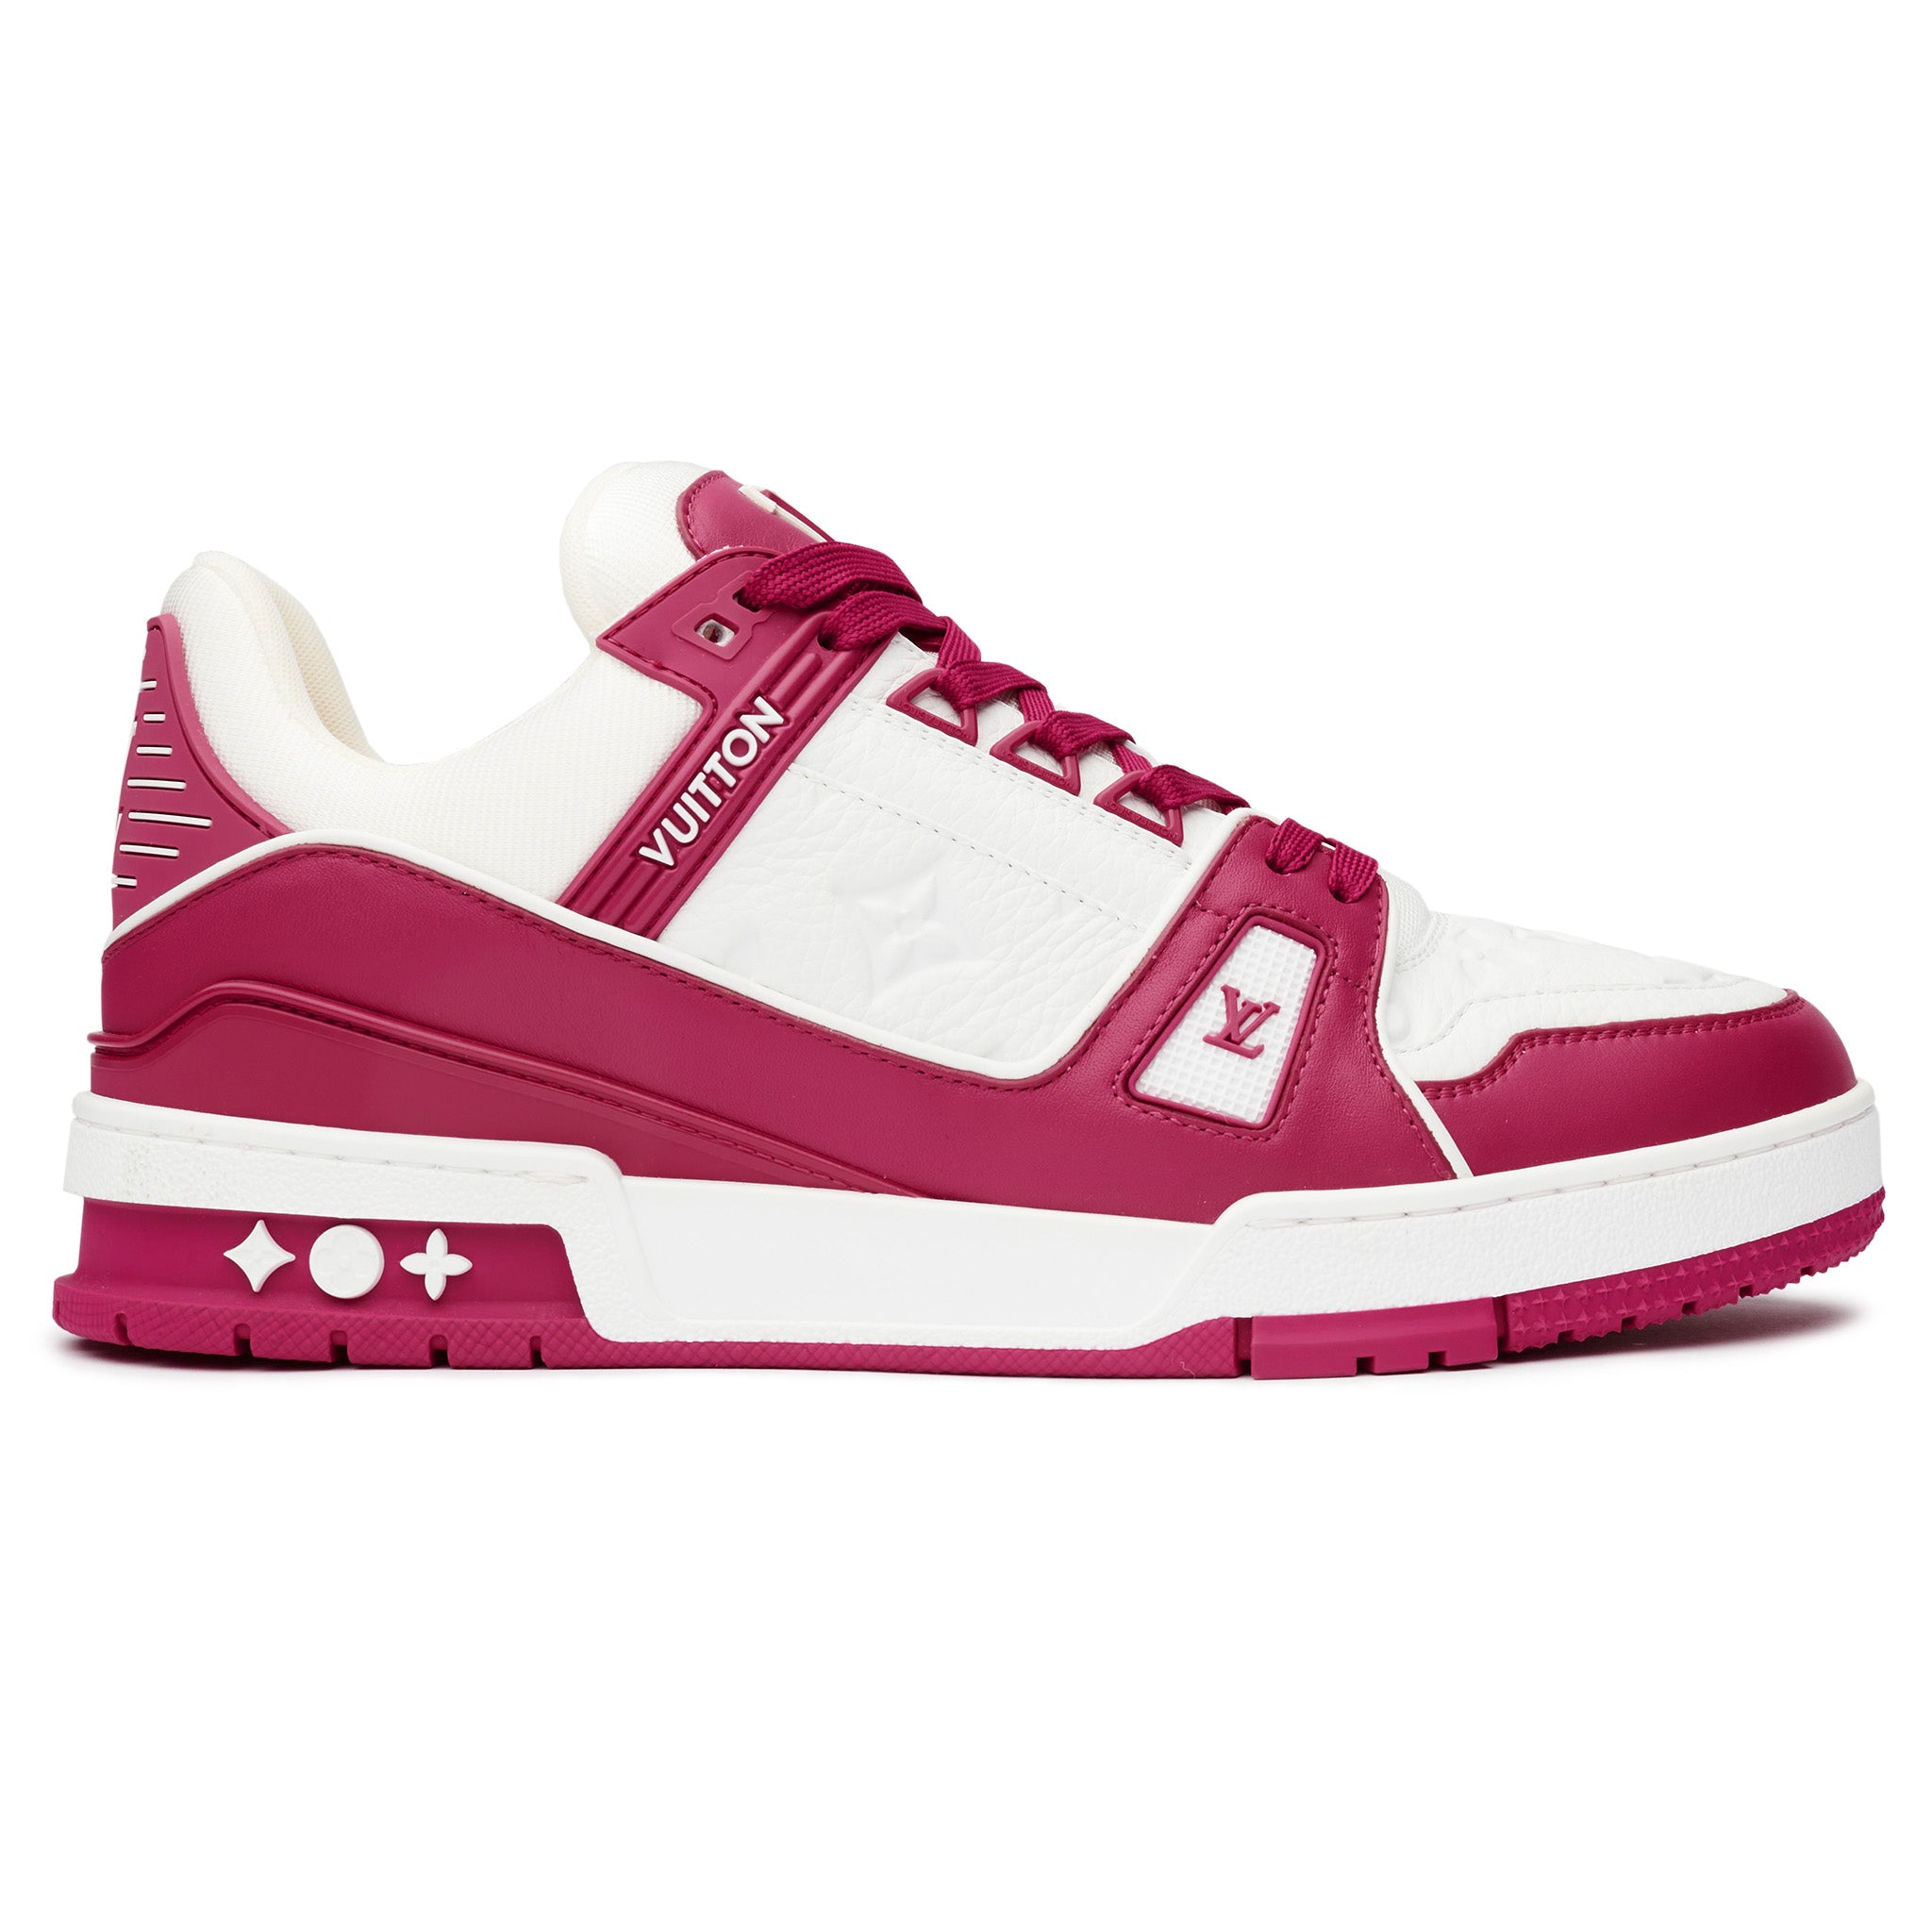 Lv trainer low trainers Louis Vuitton Pink size 9 UK in Other - 32366380